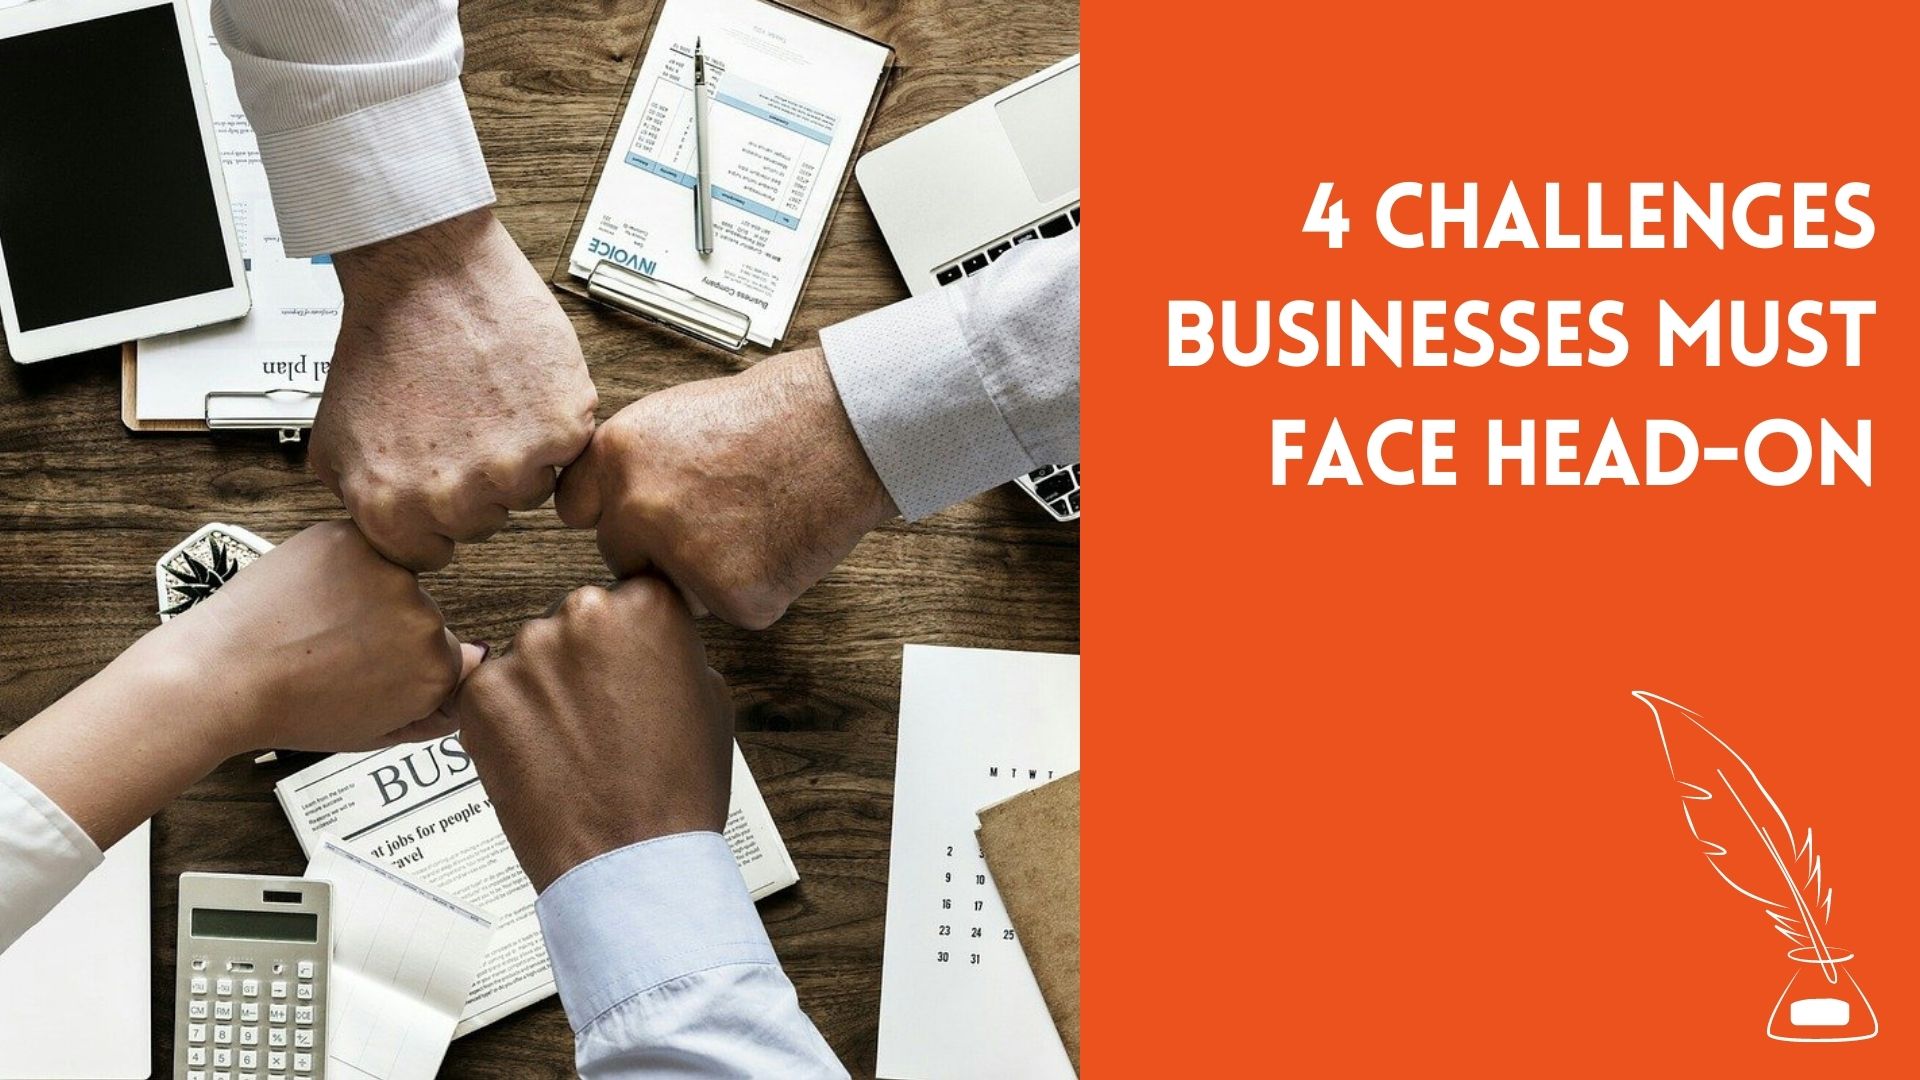 4 Challenges Businesses Must Face Head-On